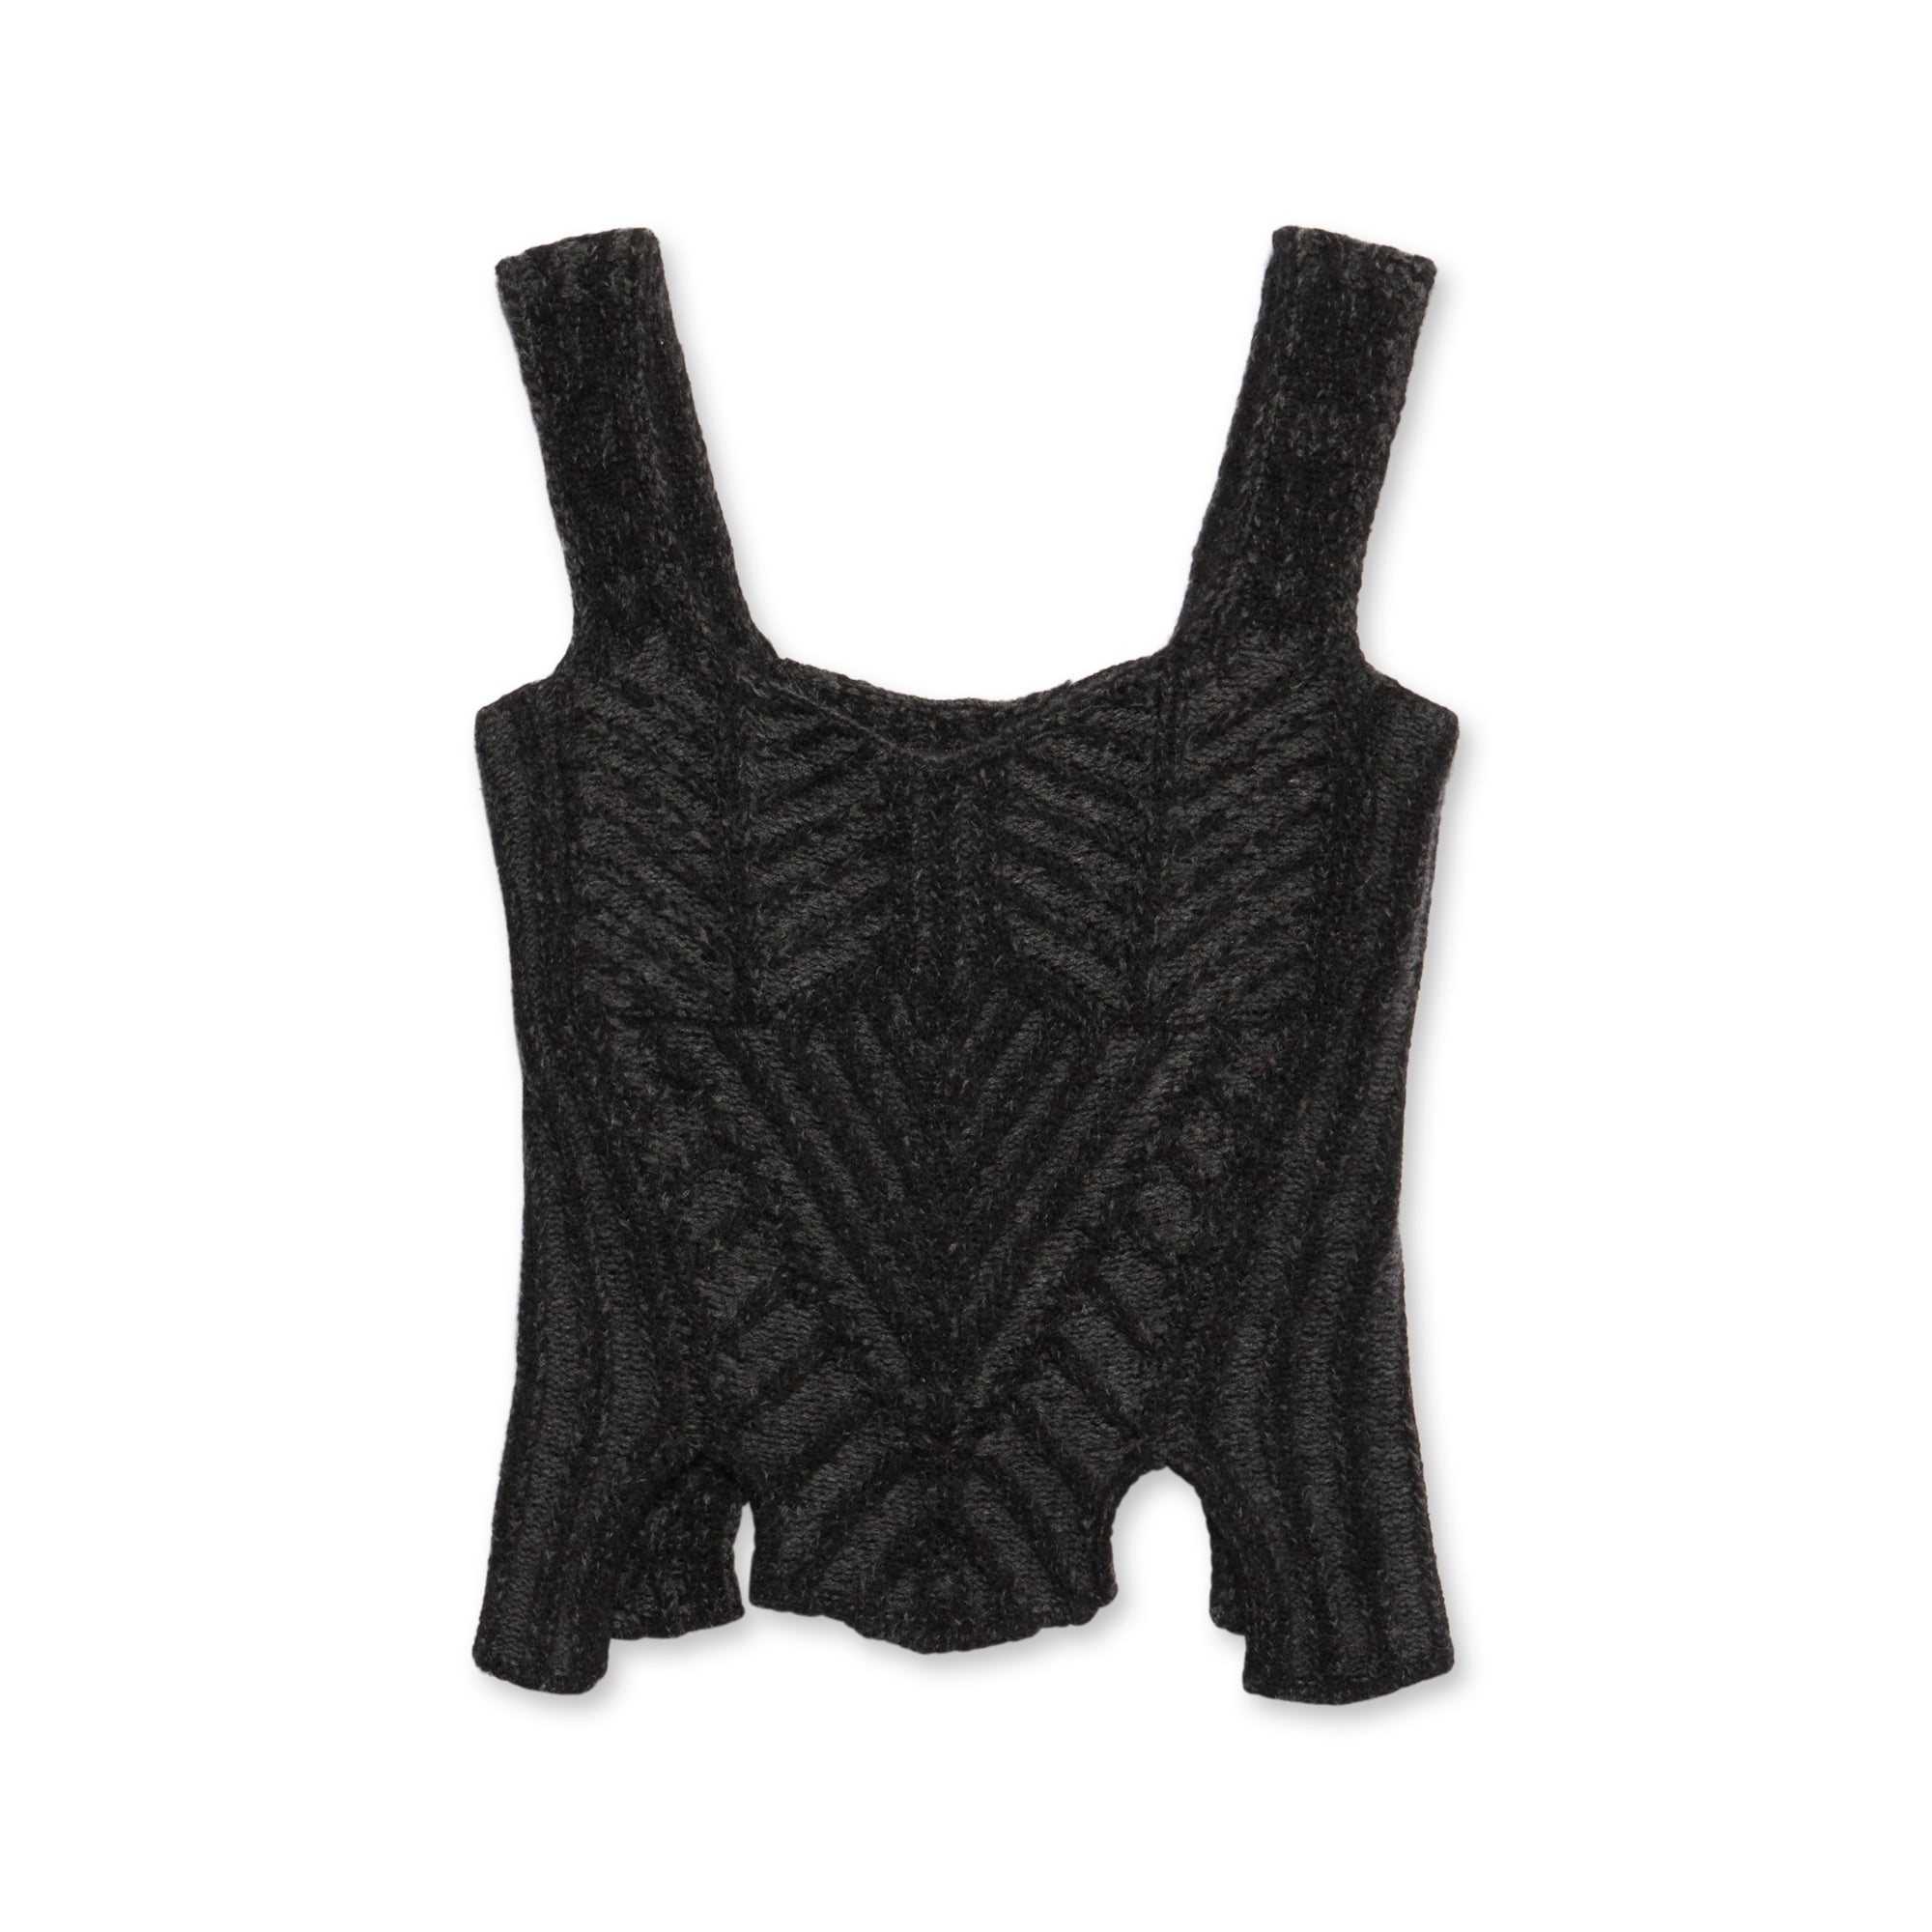 Paolina Russo - Women’s Warrior Bodice Top - (Black/Grey) view 5